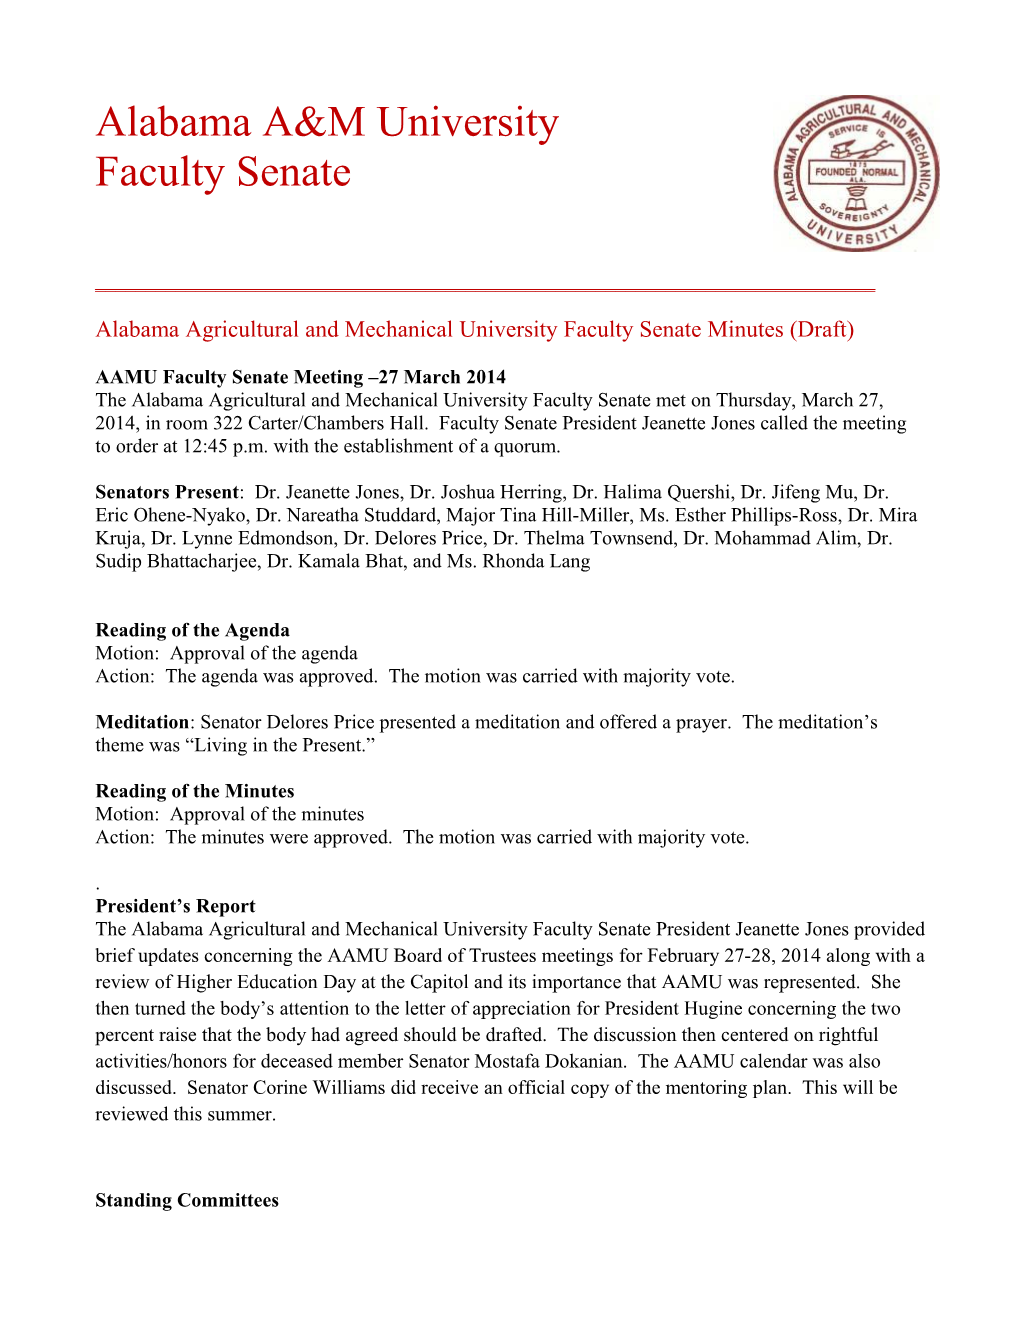 Alabama Agricultural and Mechanical University Faculty Senate Minutes (Draft)